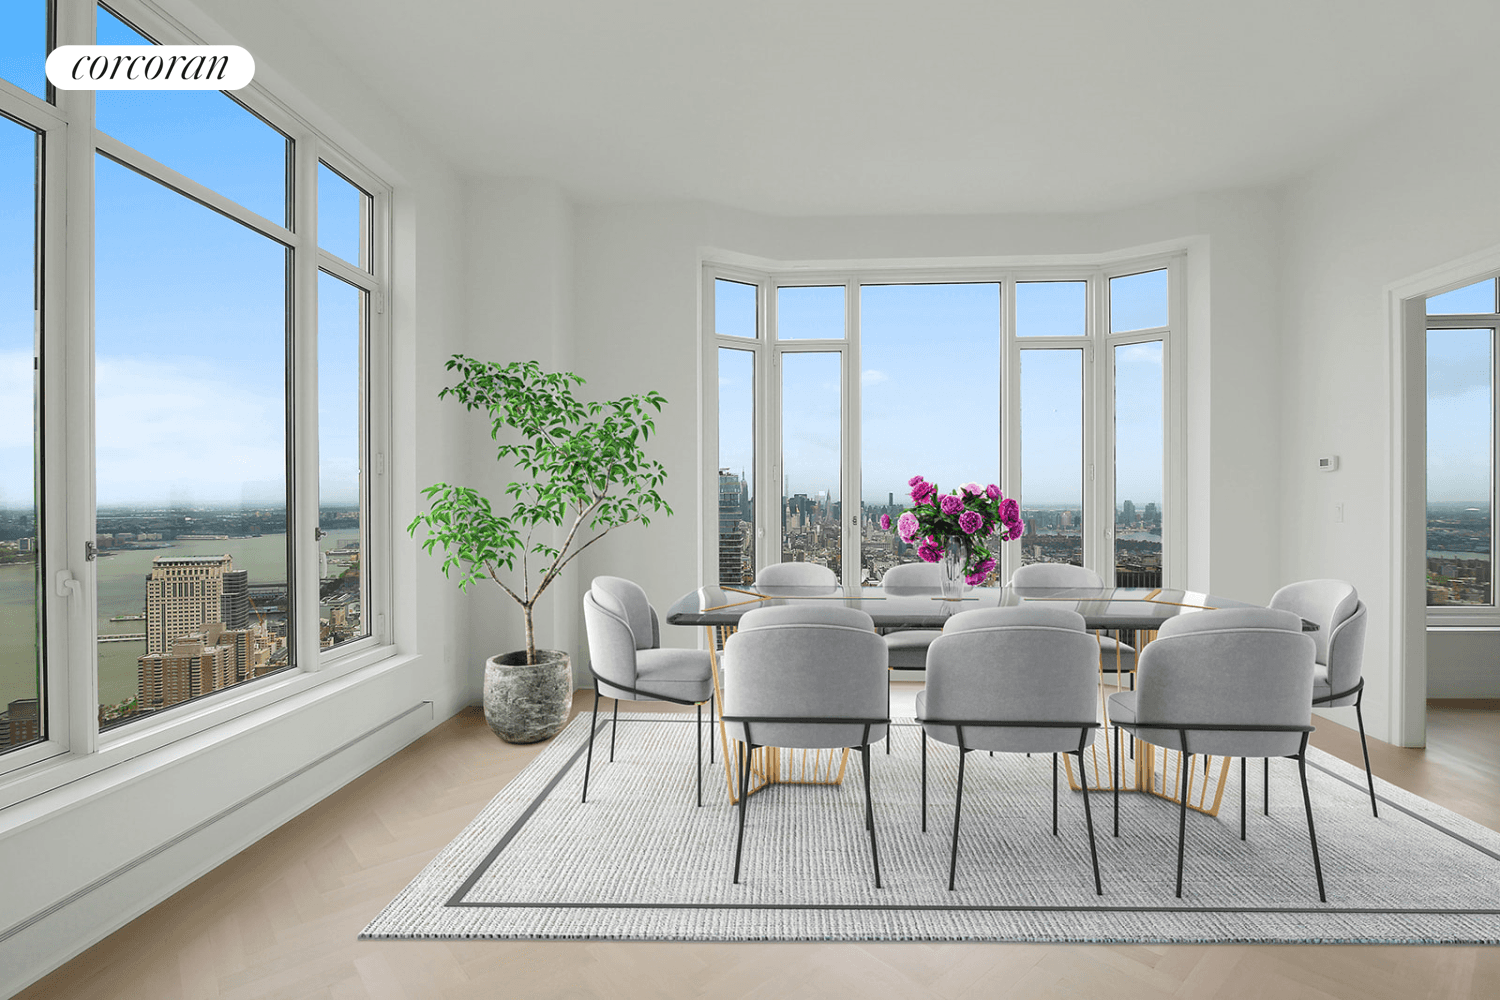 New to Market ! ! This expansive Four Bedroom residence captures sweeping views of Midtown and the Hudson River.